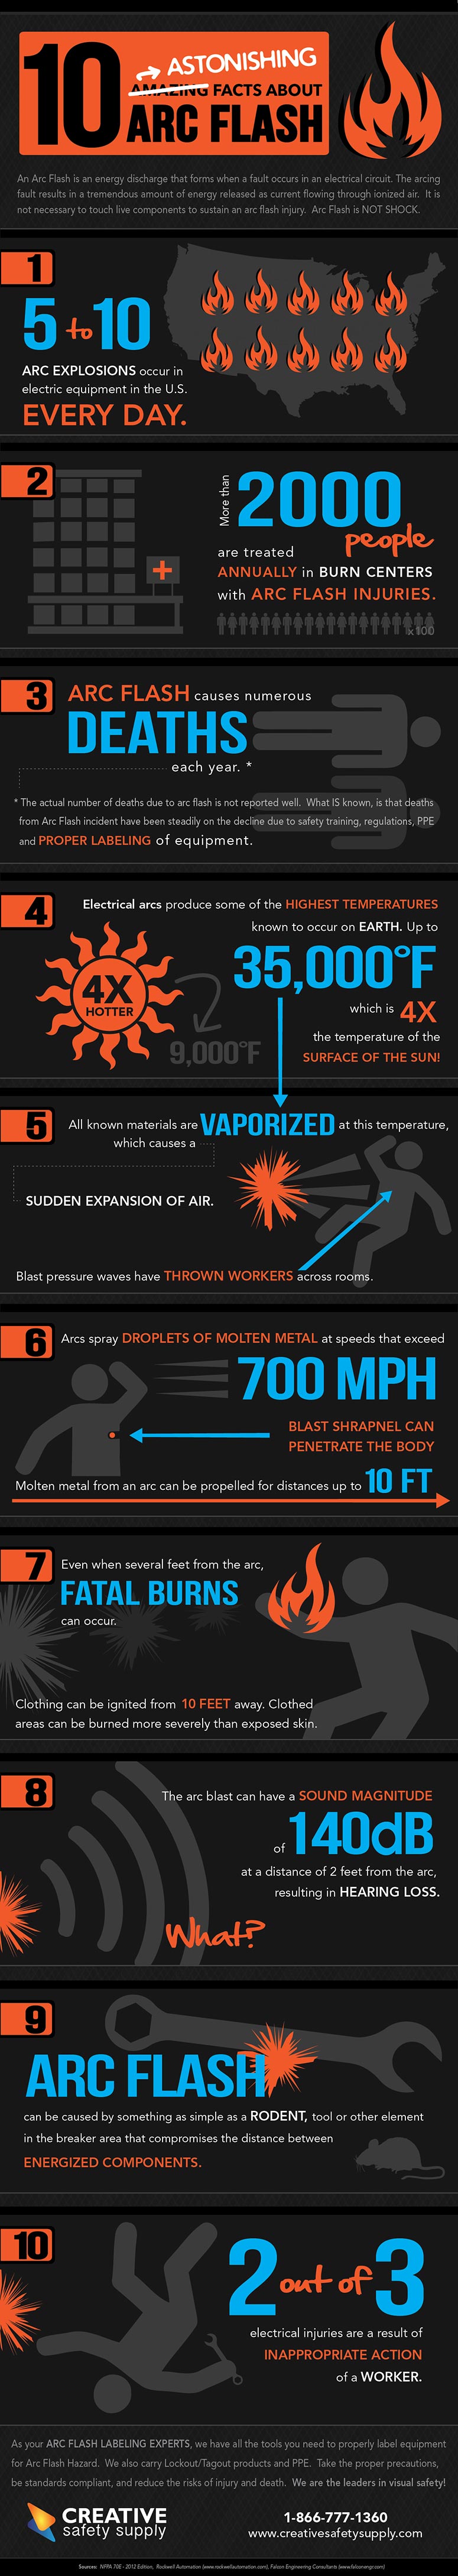 10 Astonishing Facts About Arc Flash